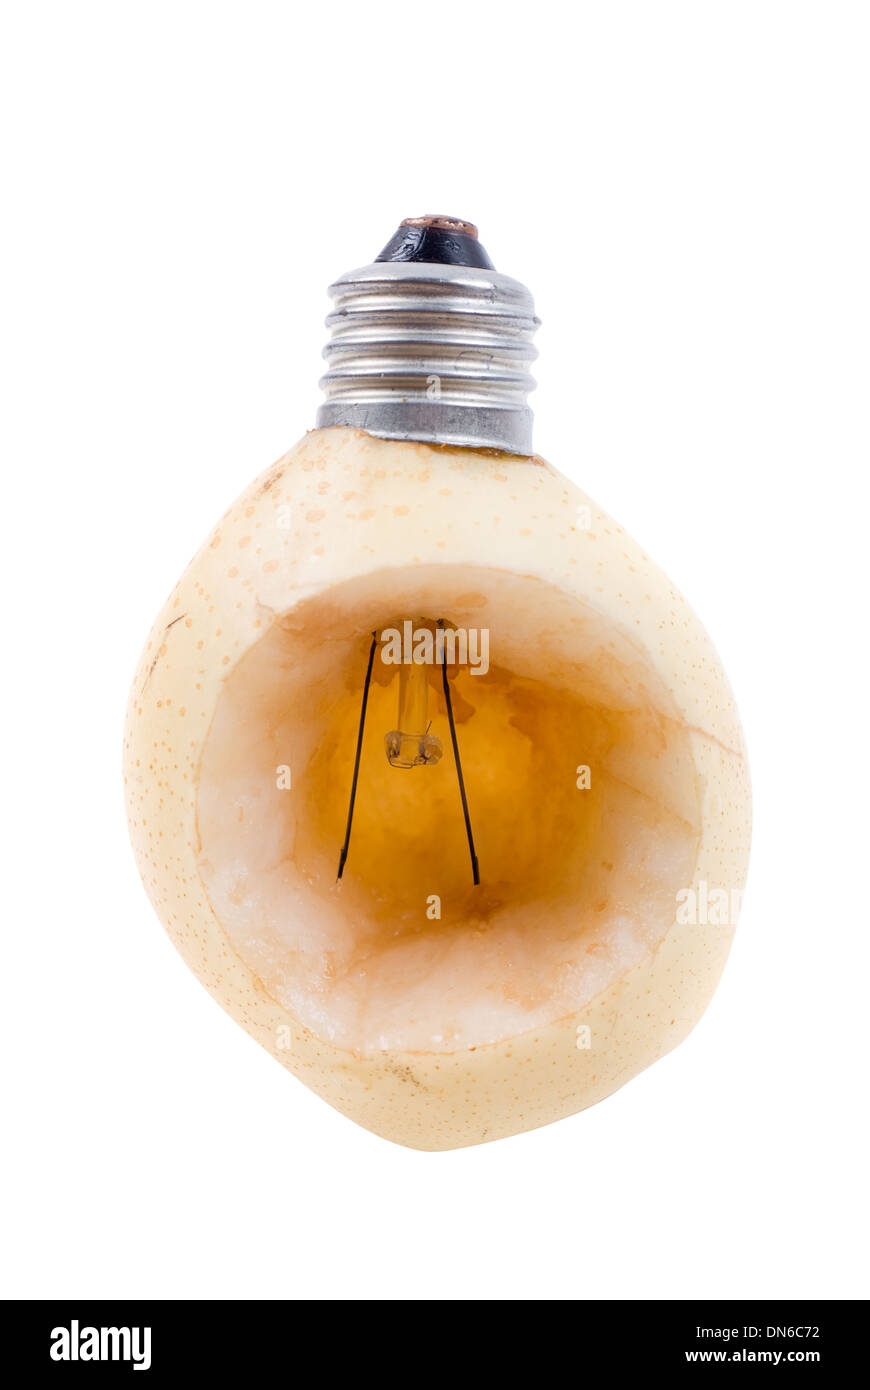 yellow pear as a bulb over white background Stock Photo